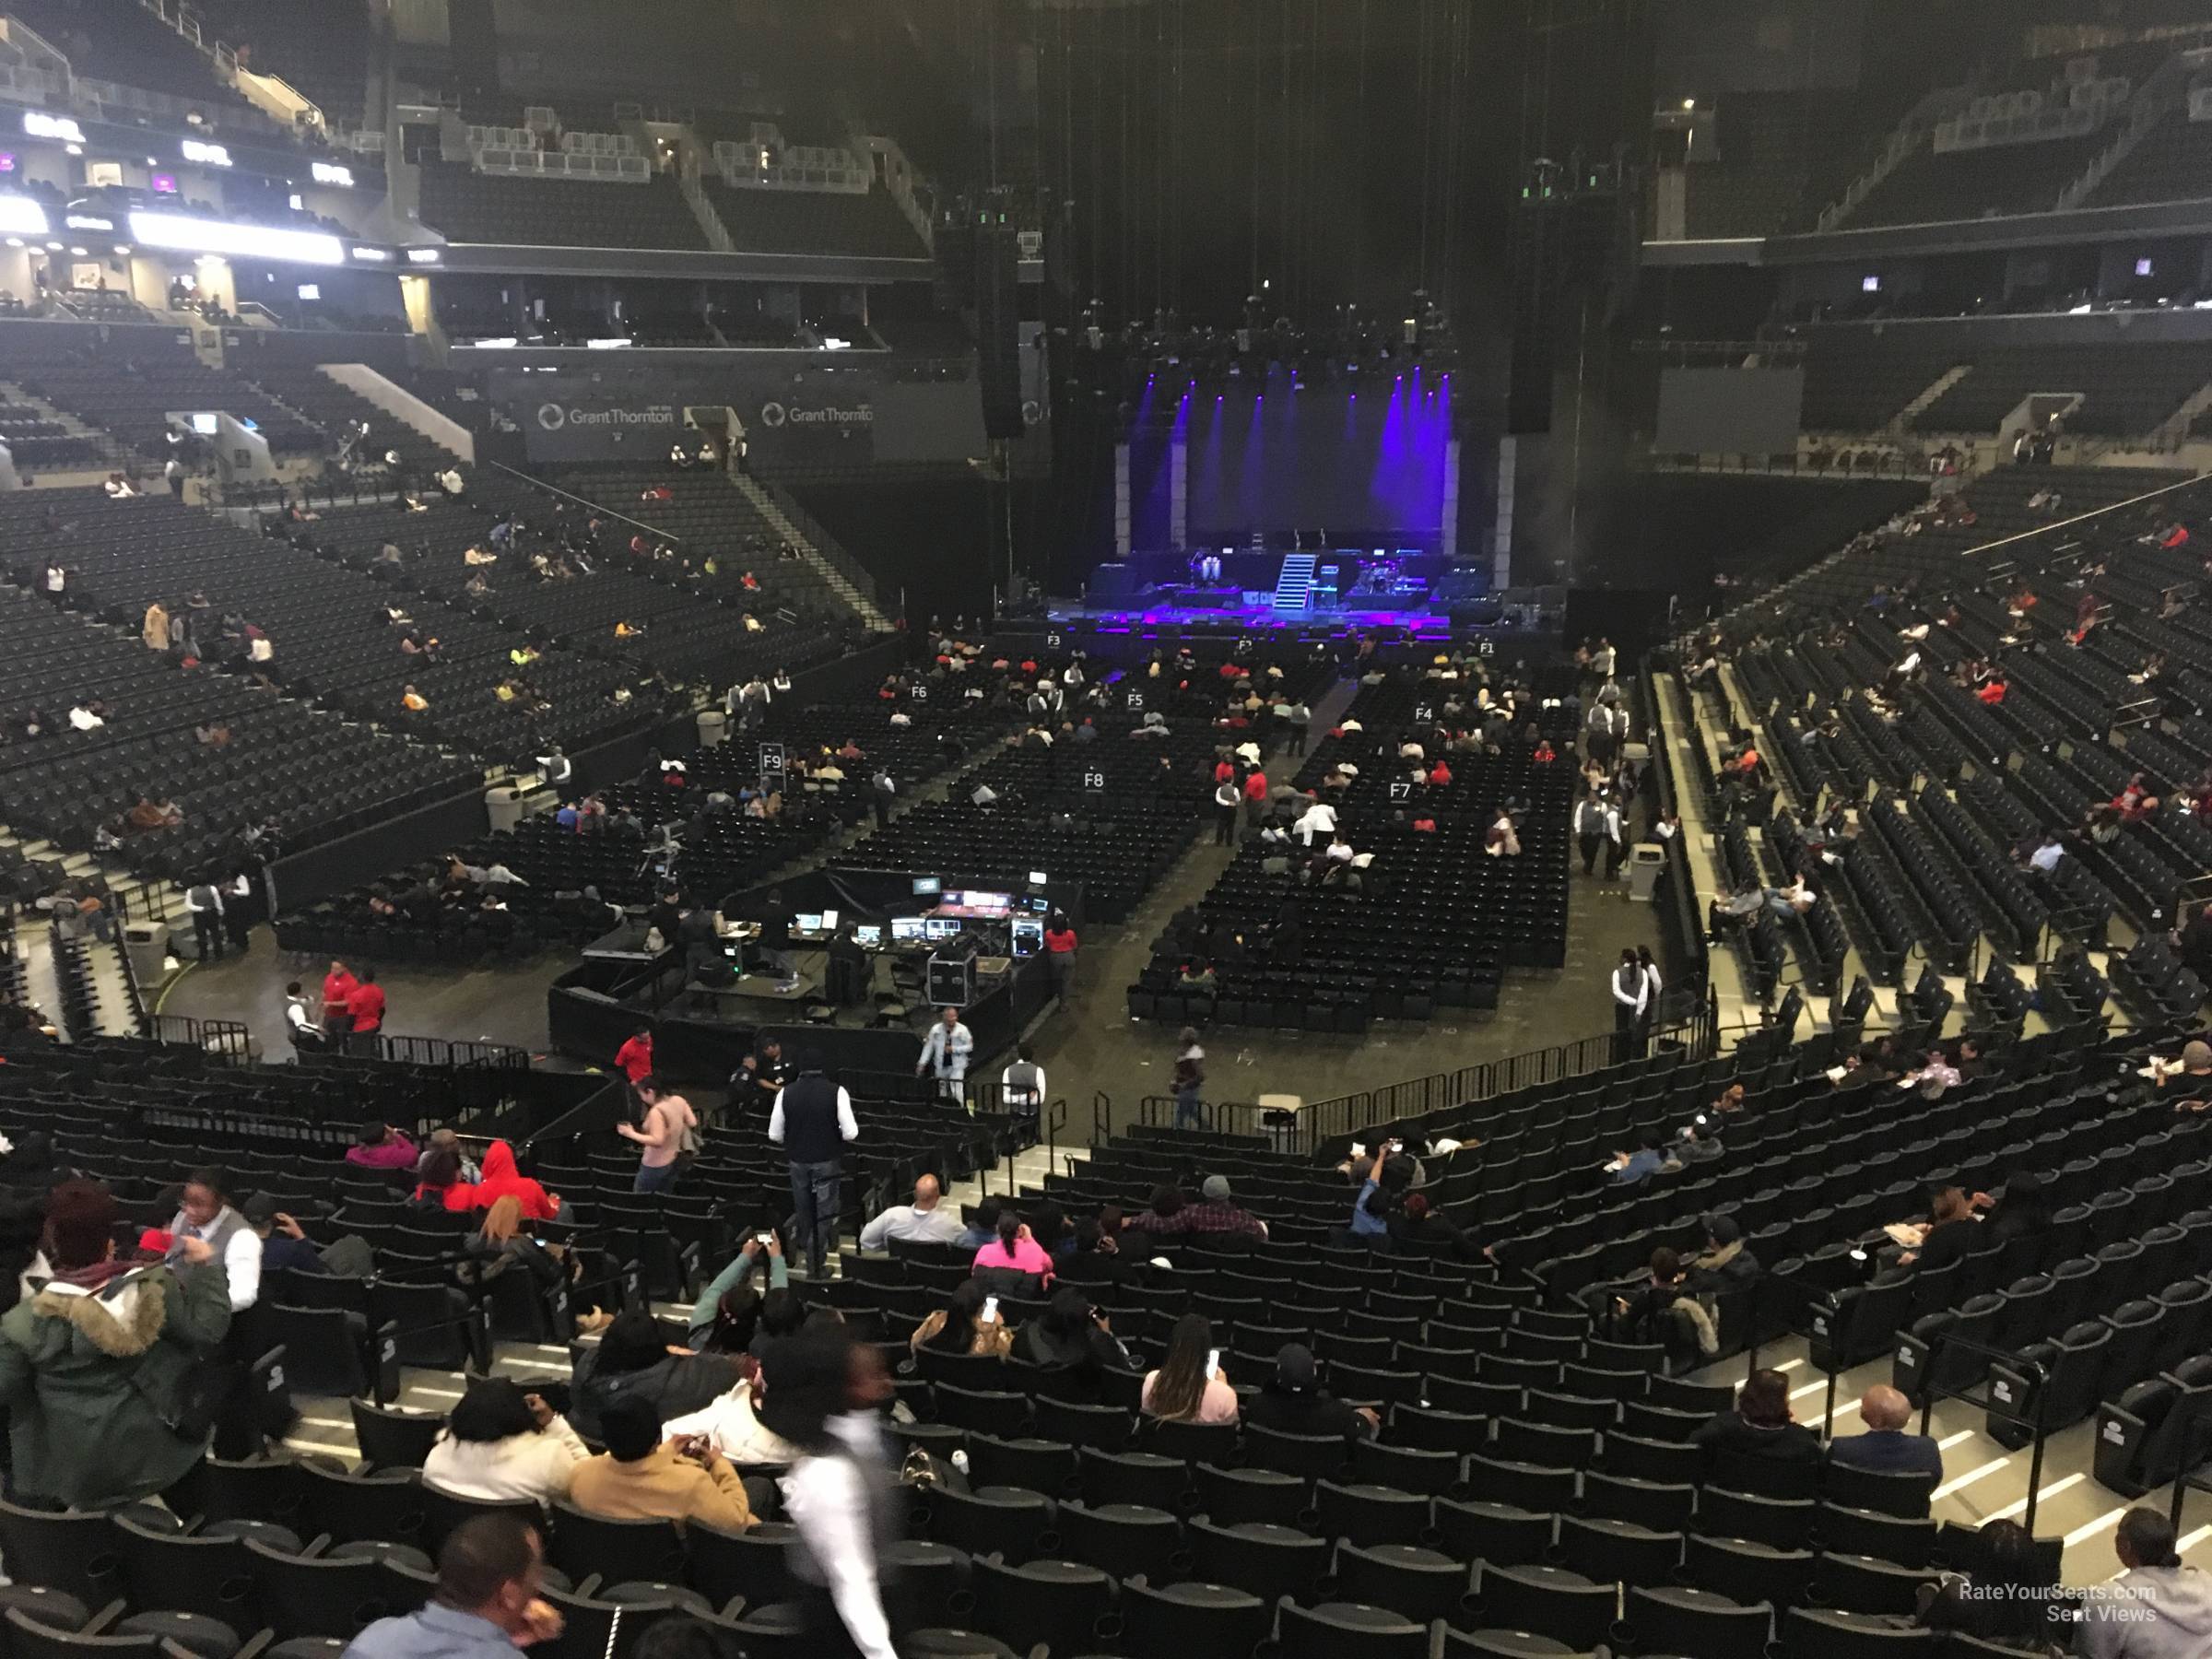 section 115, row 6 seat view  for concert - barclays center